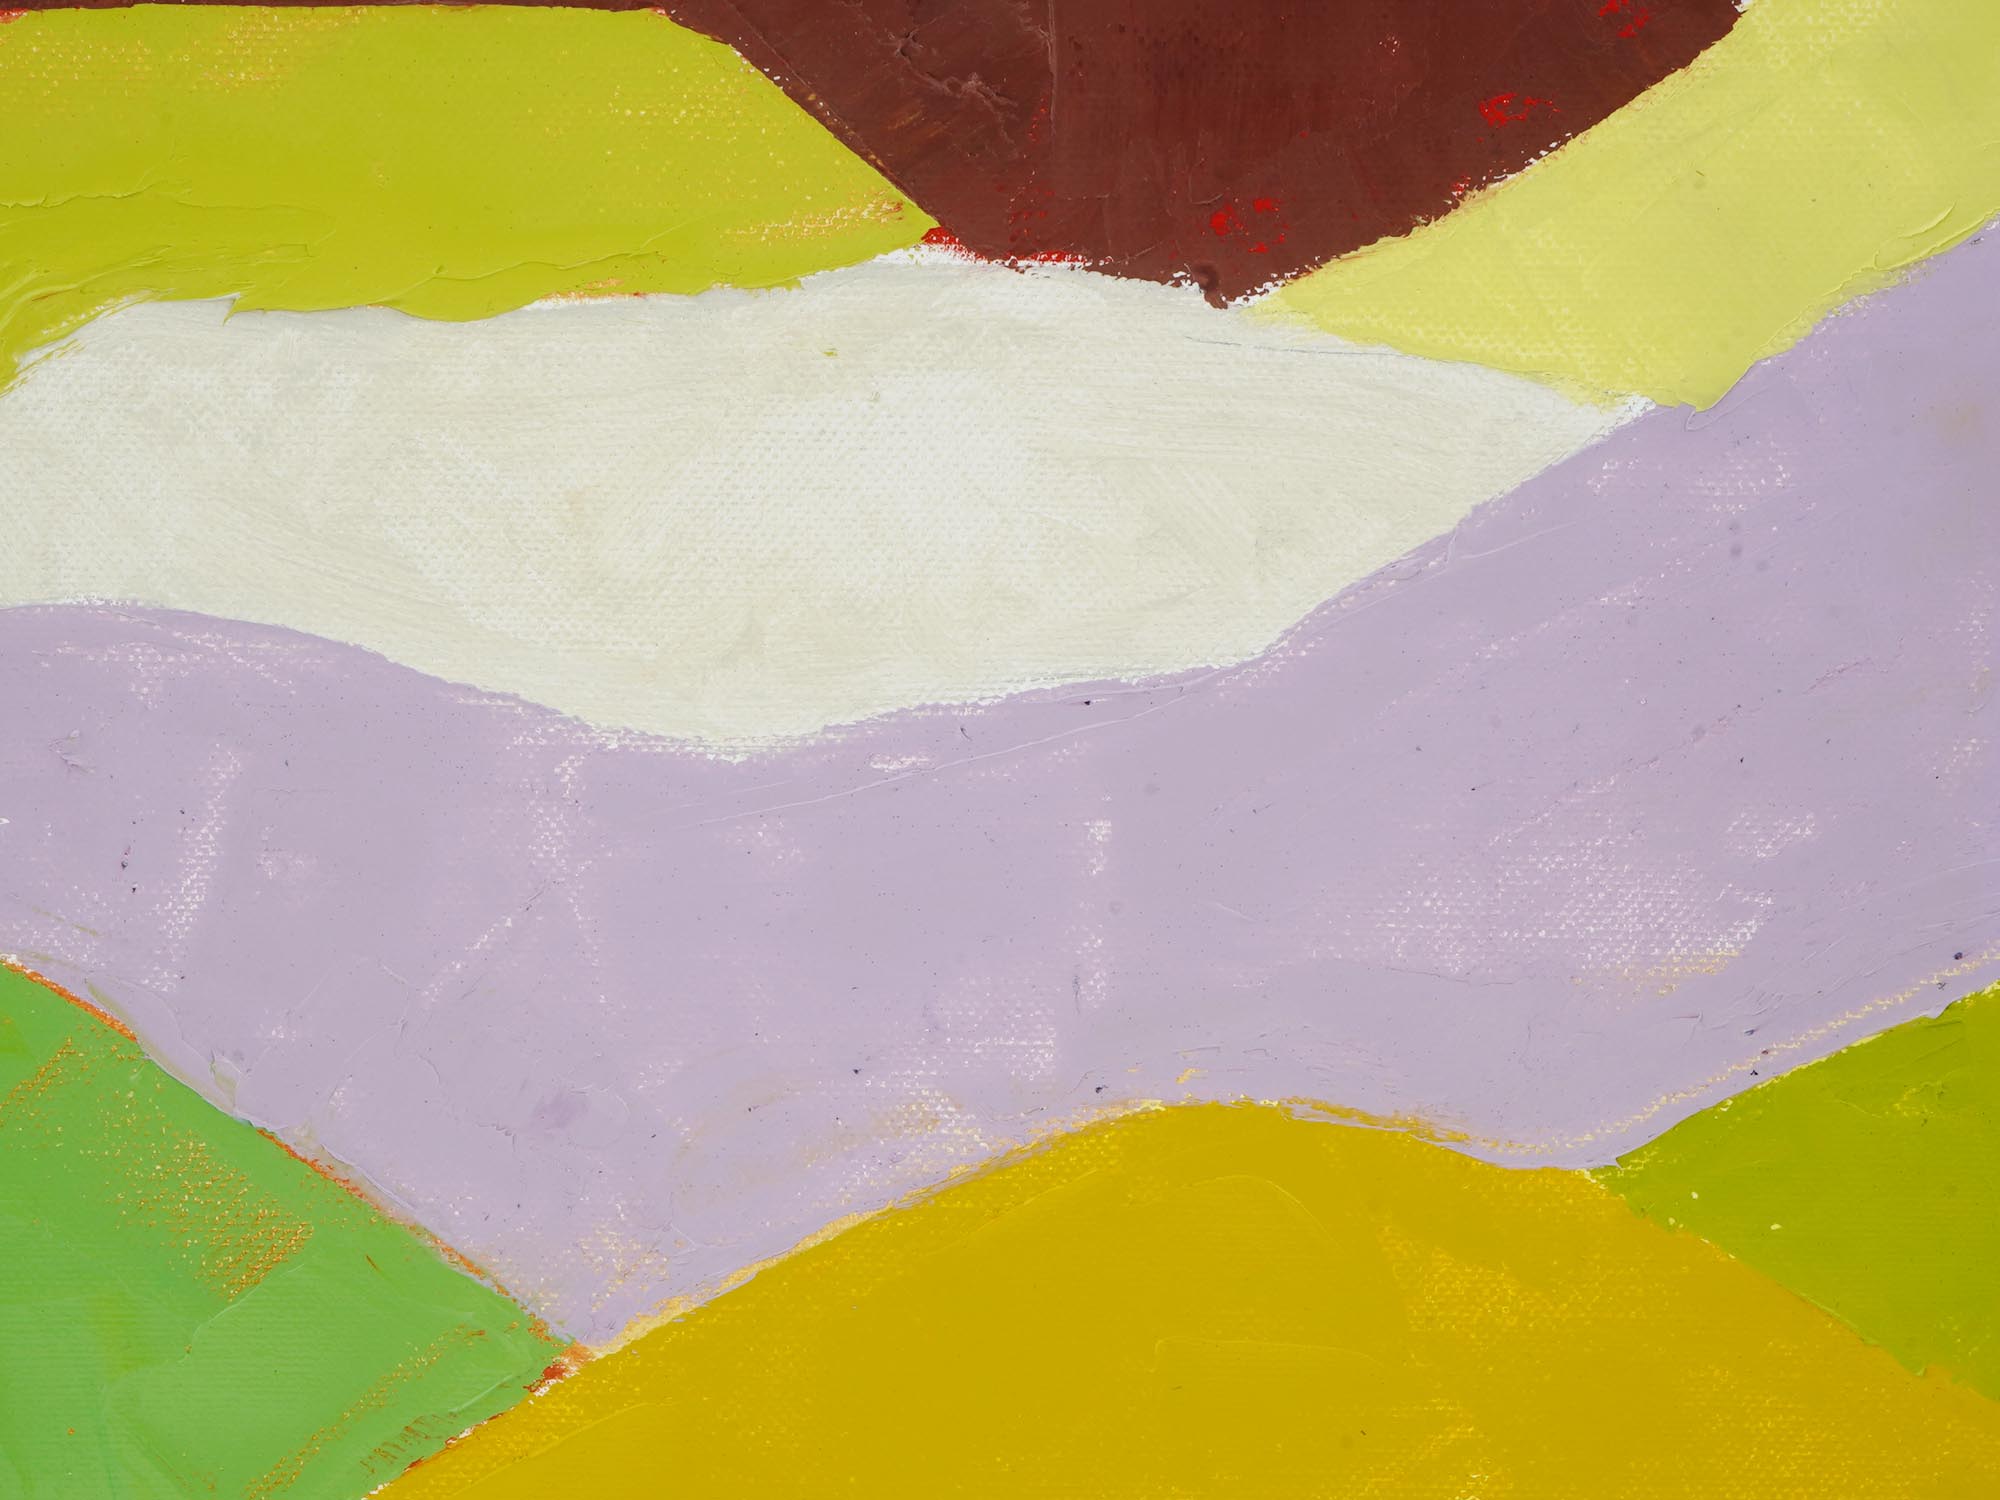 ABSTRACT ARAB LEBANESE OIL PAINTING BY ETEL ADNAN PIC-1